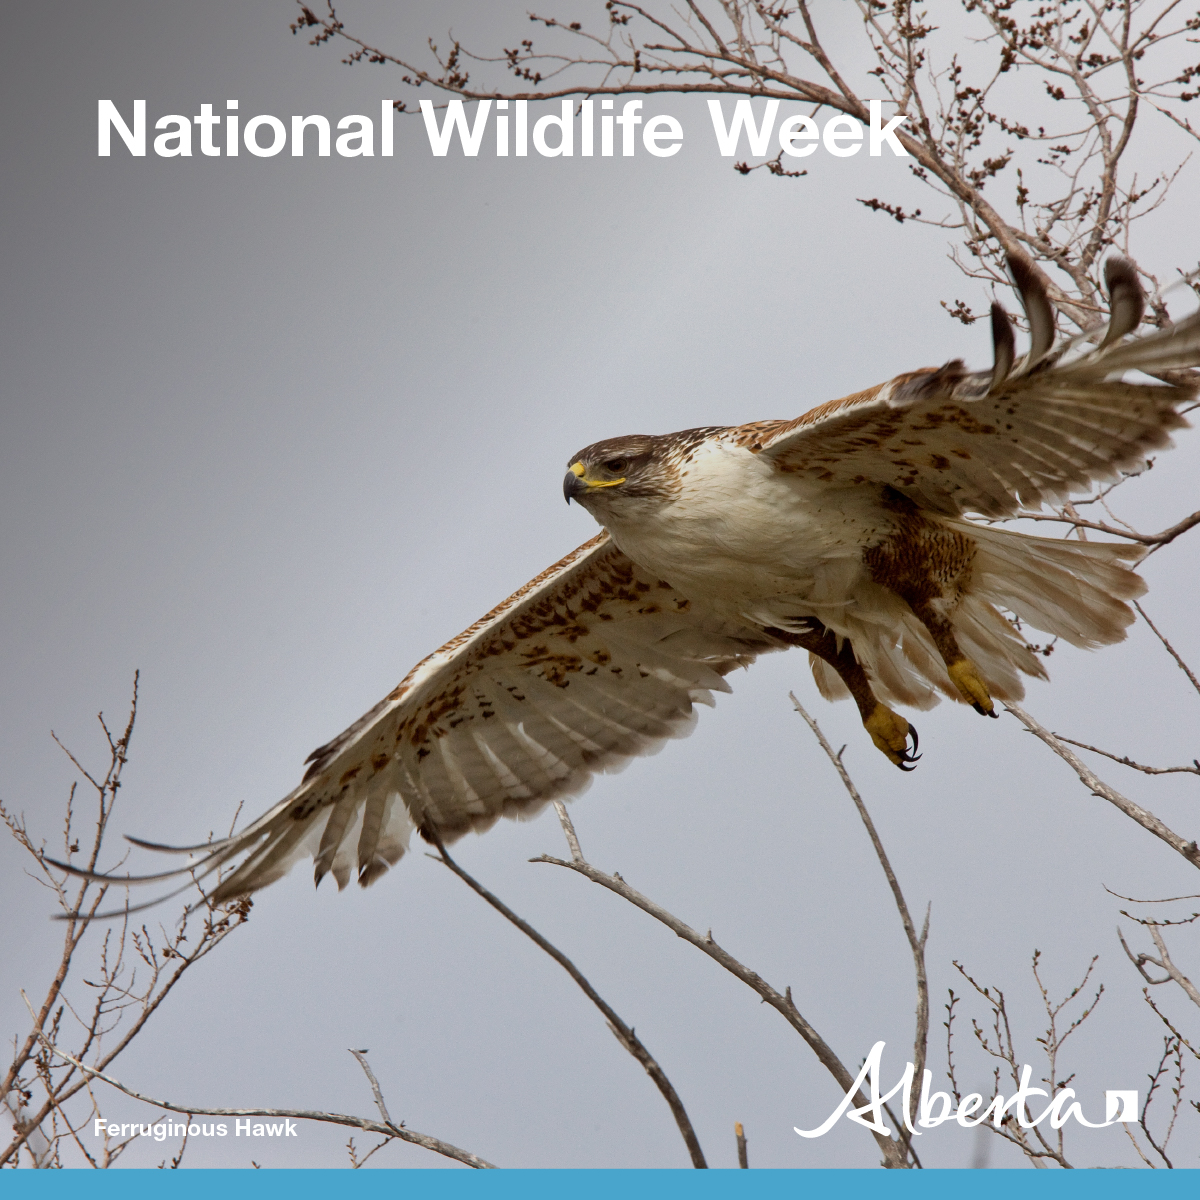 The Ferruginous Hawk is a truly majestic bird. It’s been seen in Alberta for generations, and is the largest hawk in North America. This year, we launched a new recovery plan to protect this hawk and send numbers soaring in the coming years. Learn more: open.alberta.ca/publications/a…